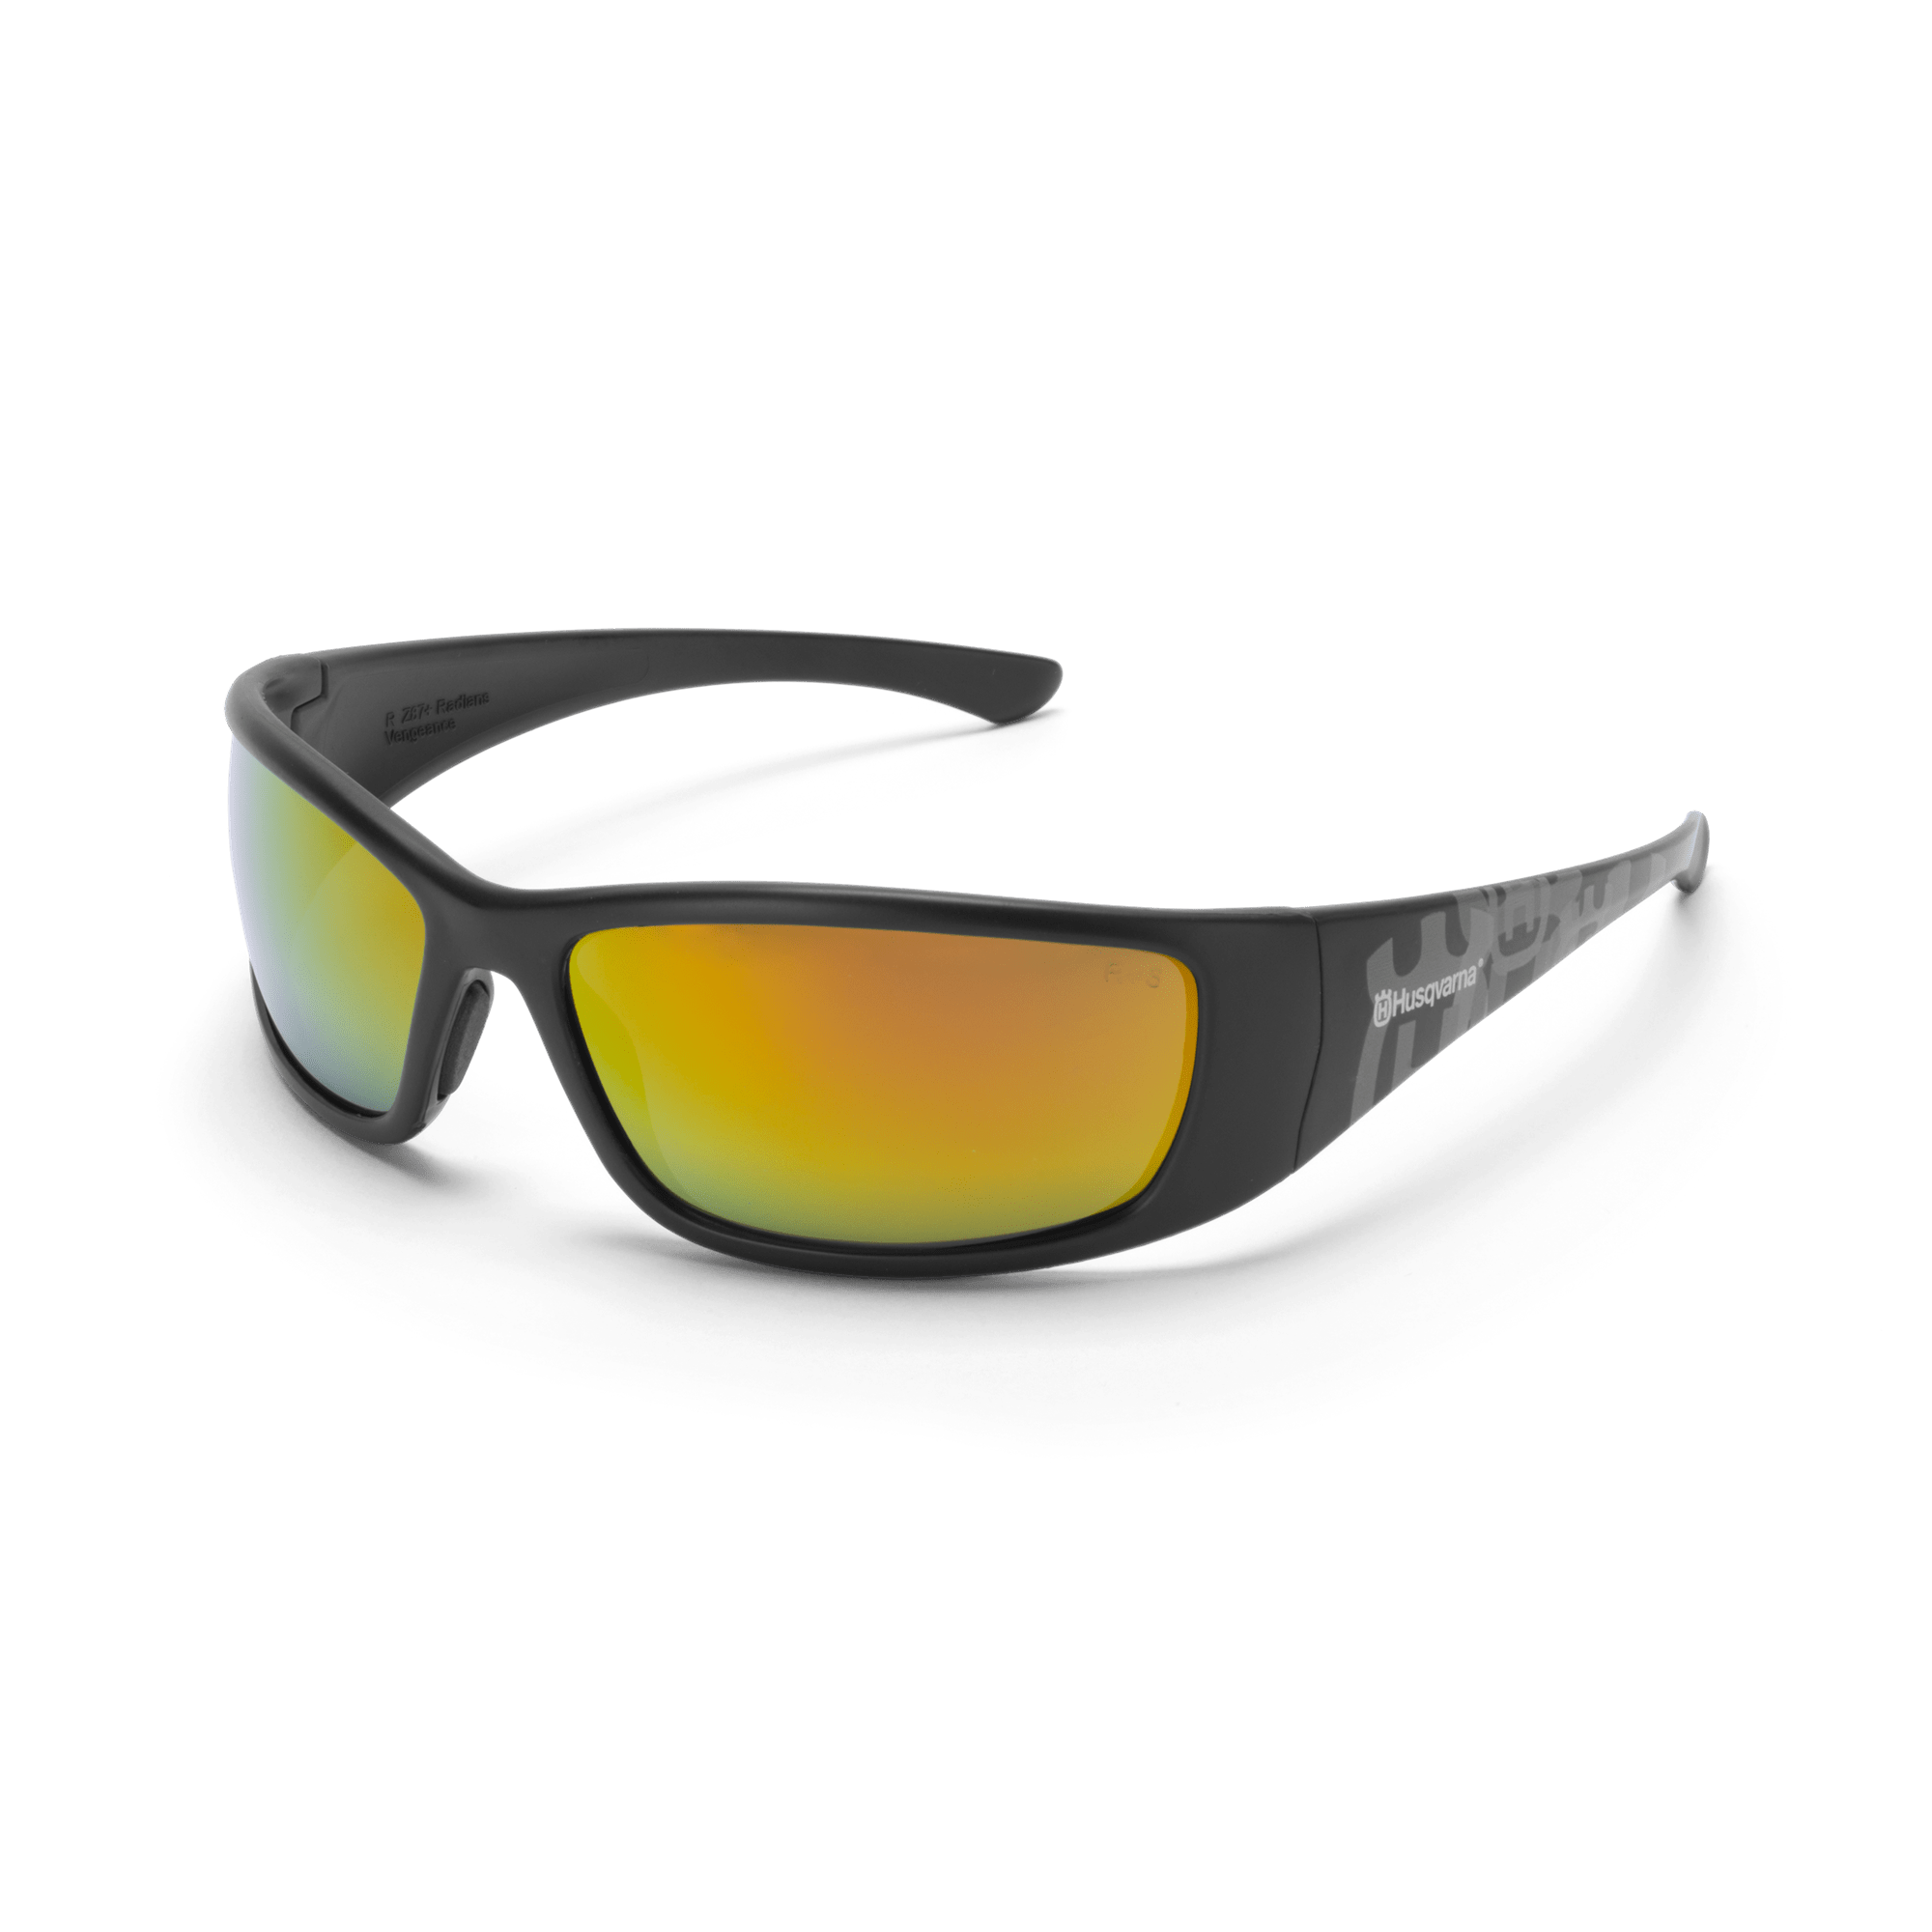 Image for Freestyle Black Protective Glasses from HusqvarnaB2C